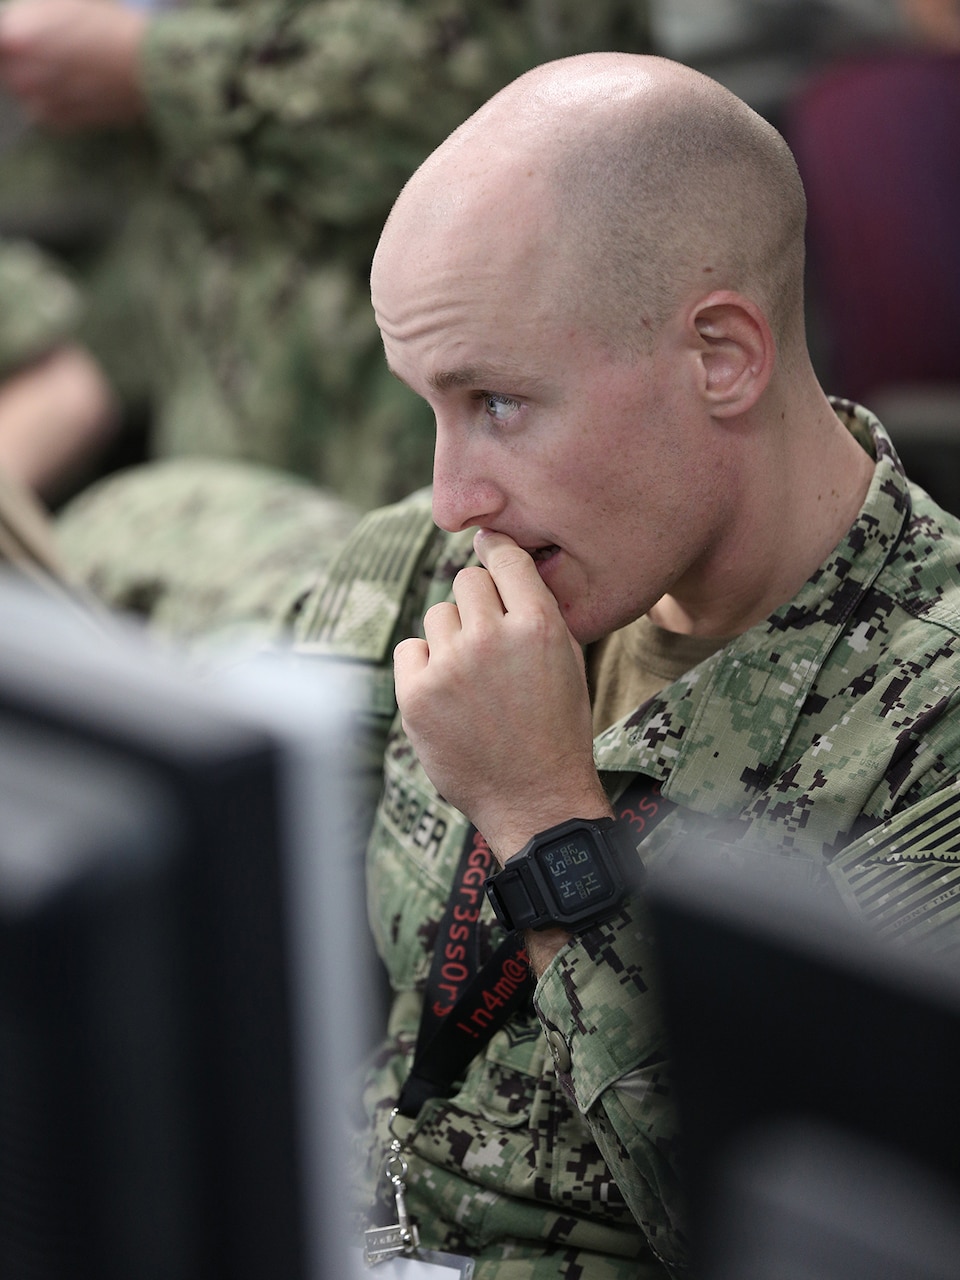 A lone uniformed service member reads a computer screen.  His fingers are pressed to his lips, and he appears concerned.